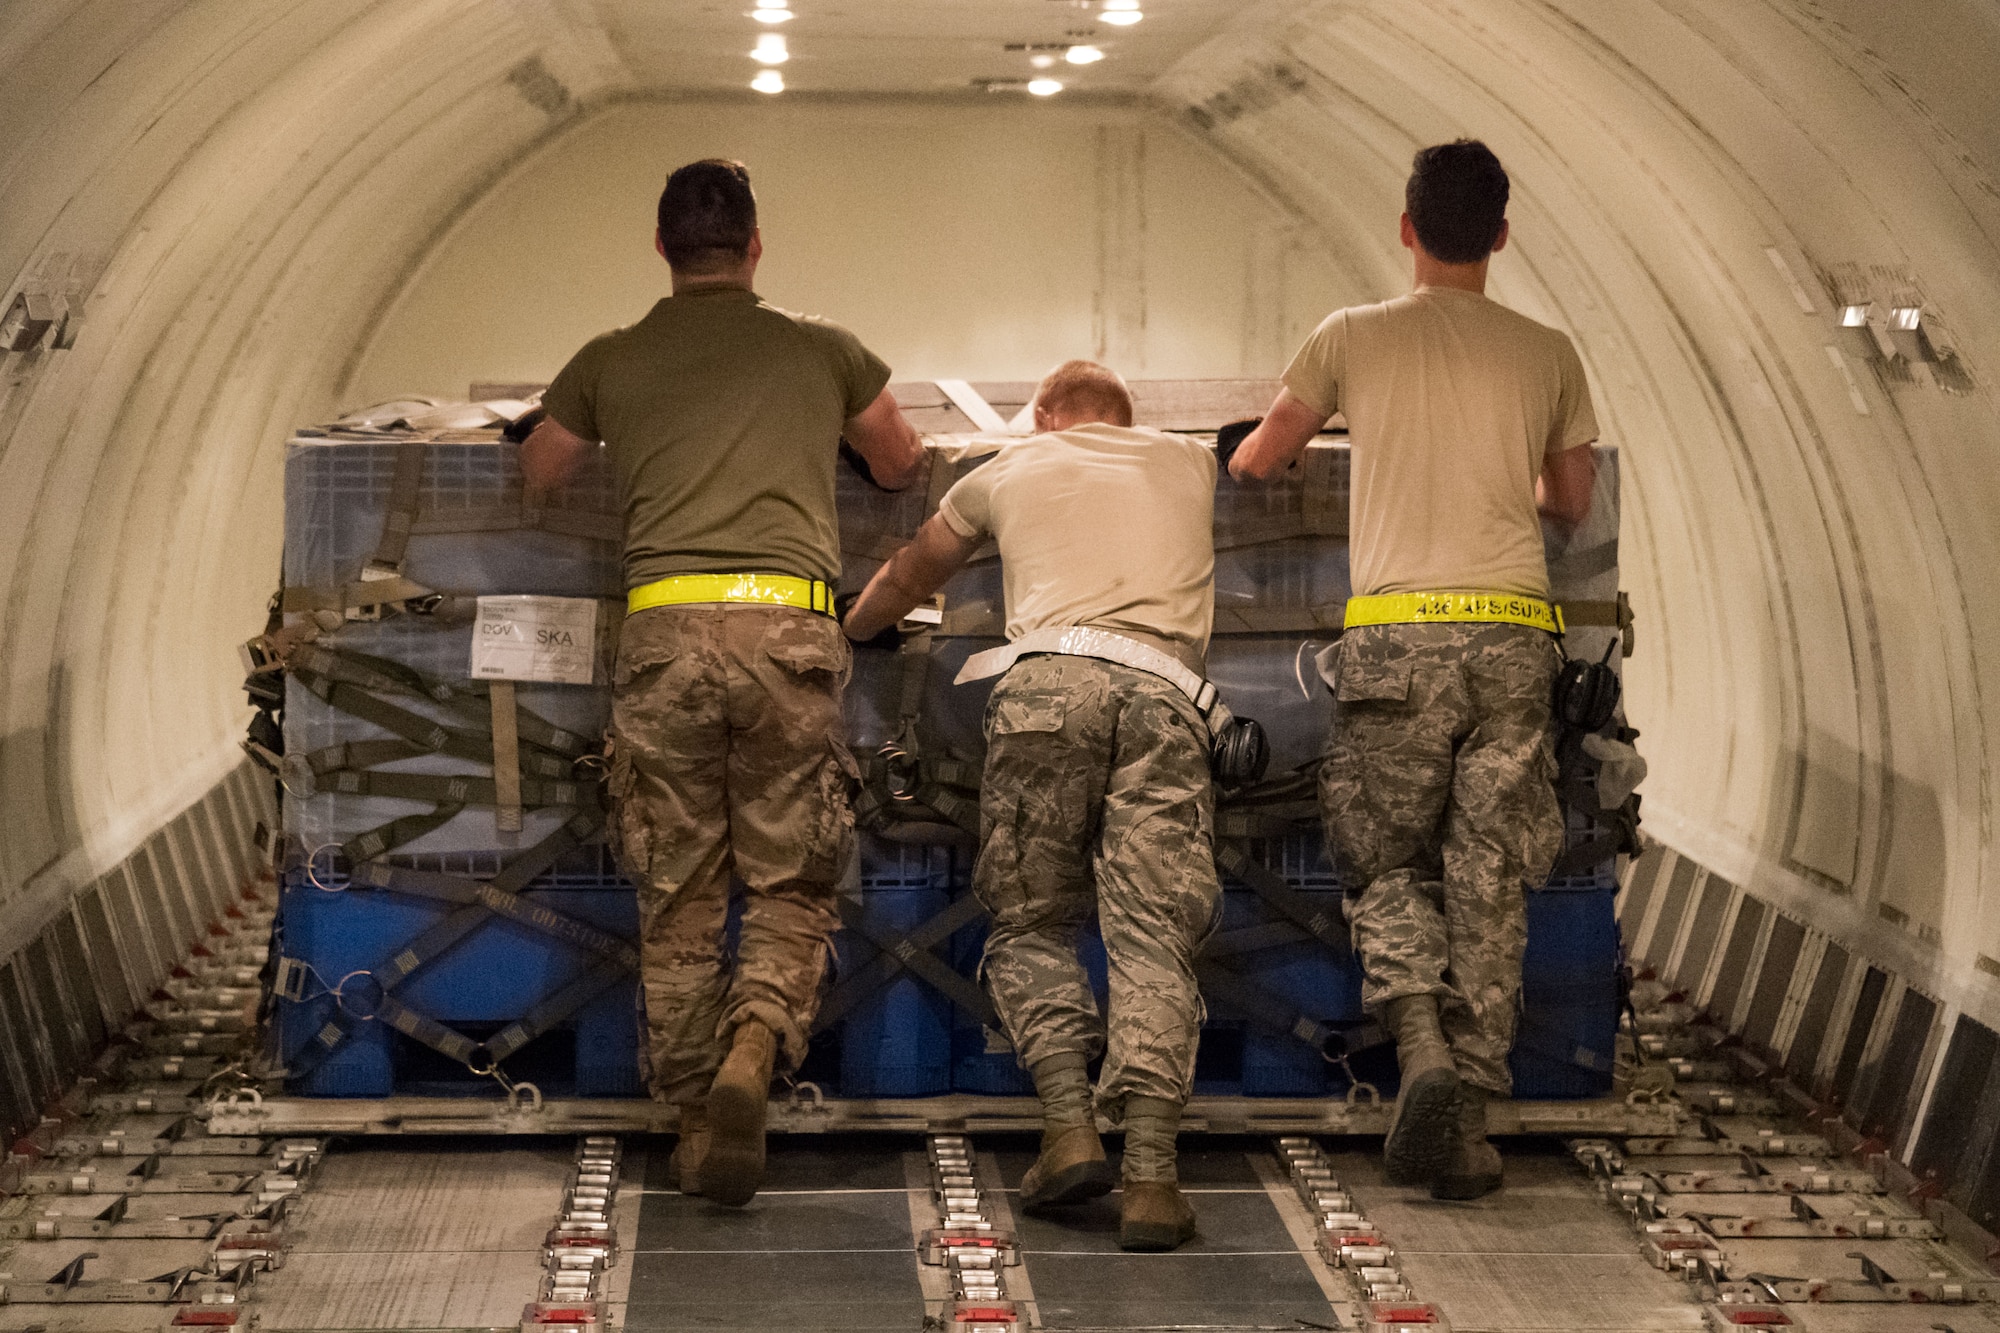 Members of 436th Aerial Port Squadron ramp services section push a pallet into its position in the main cargo deck of an Air Transport International Boeing 757-200 aircraft Sept. 8, 2019, at Dover Air Force Base, Del. The ATI aircraft, part of the Civil Reserve Air Fleet program, was contracted to transport cargo and 30 Team Dover members to Fairchild AFB, Wash., participating in Mobility Guardian 2019. “We welcome the inclusion of one of our CRAF partners in MG19 as it marks the first time Air Mobility Command has exercised a commercial airlift component of our wartime plan,” said Maj. Adam Crane, AMC Headquarters CRAF Branch Chief, Scott AFB, Ill. (U.S. Air Force photo by Roland Balik)